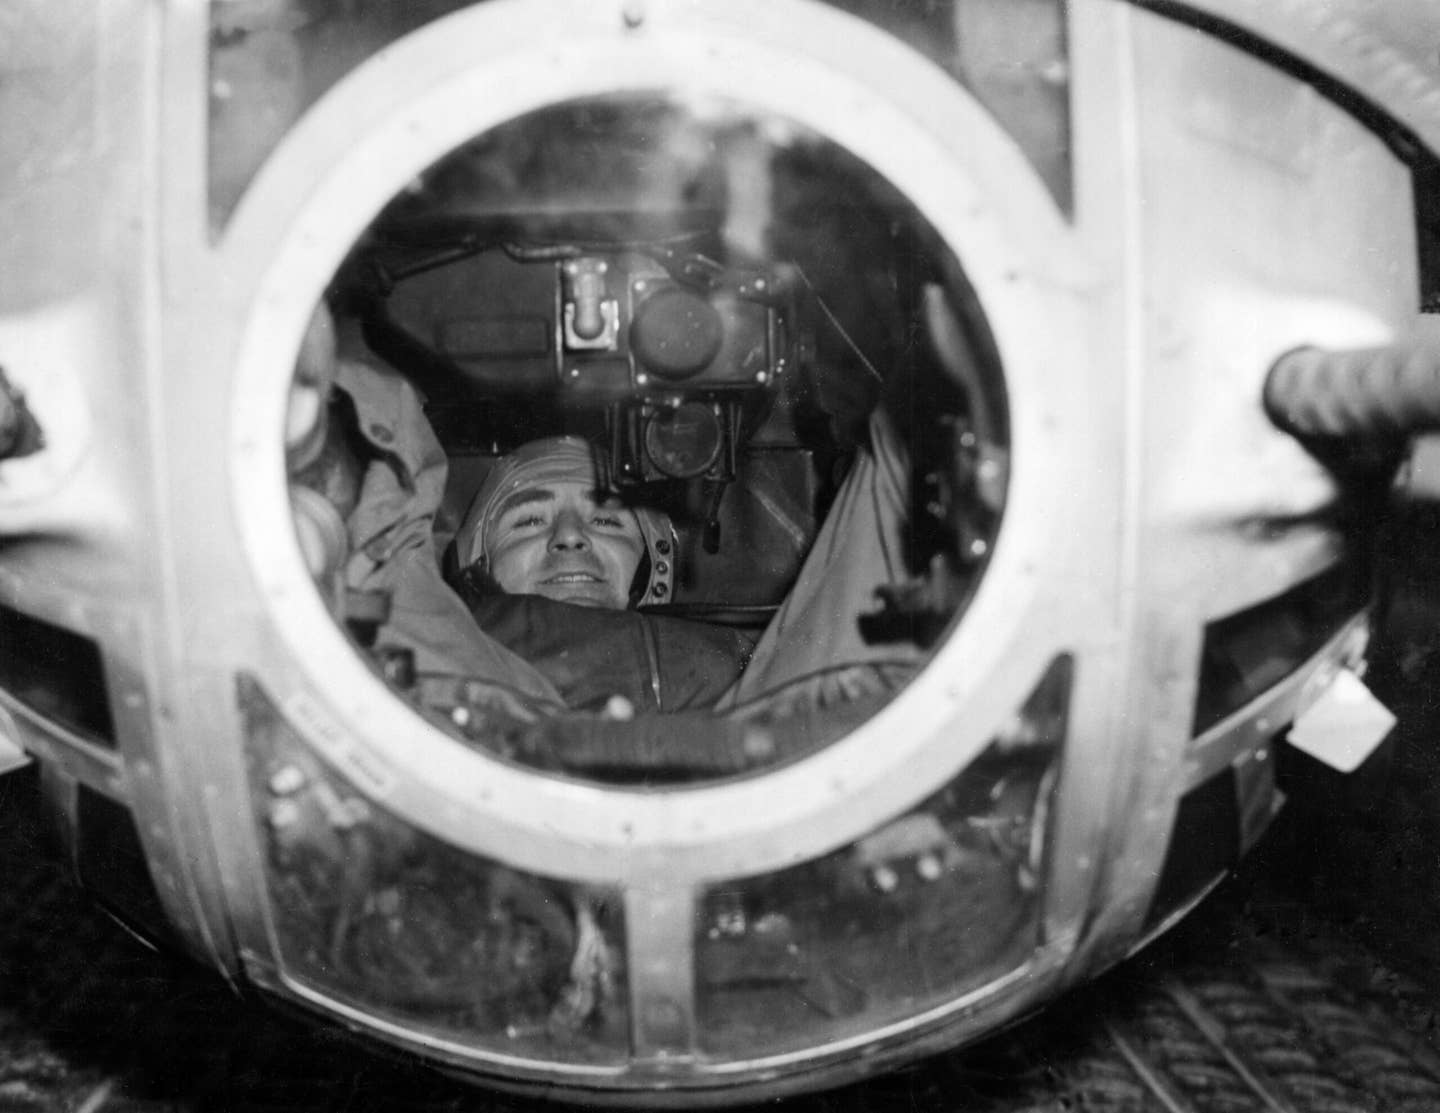 A gunner sitting at his action station in a B-17 ball turret, September 1944. <em>Photo by Mondadori via Getty Images</em>